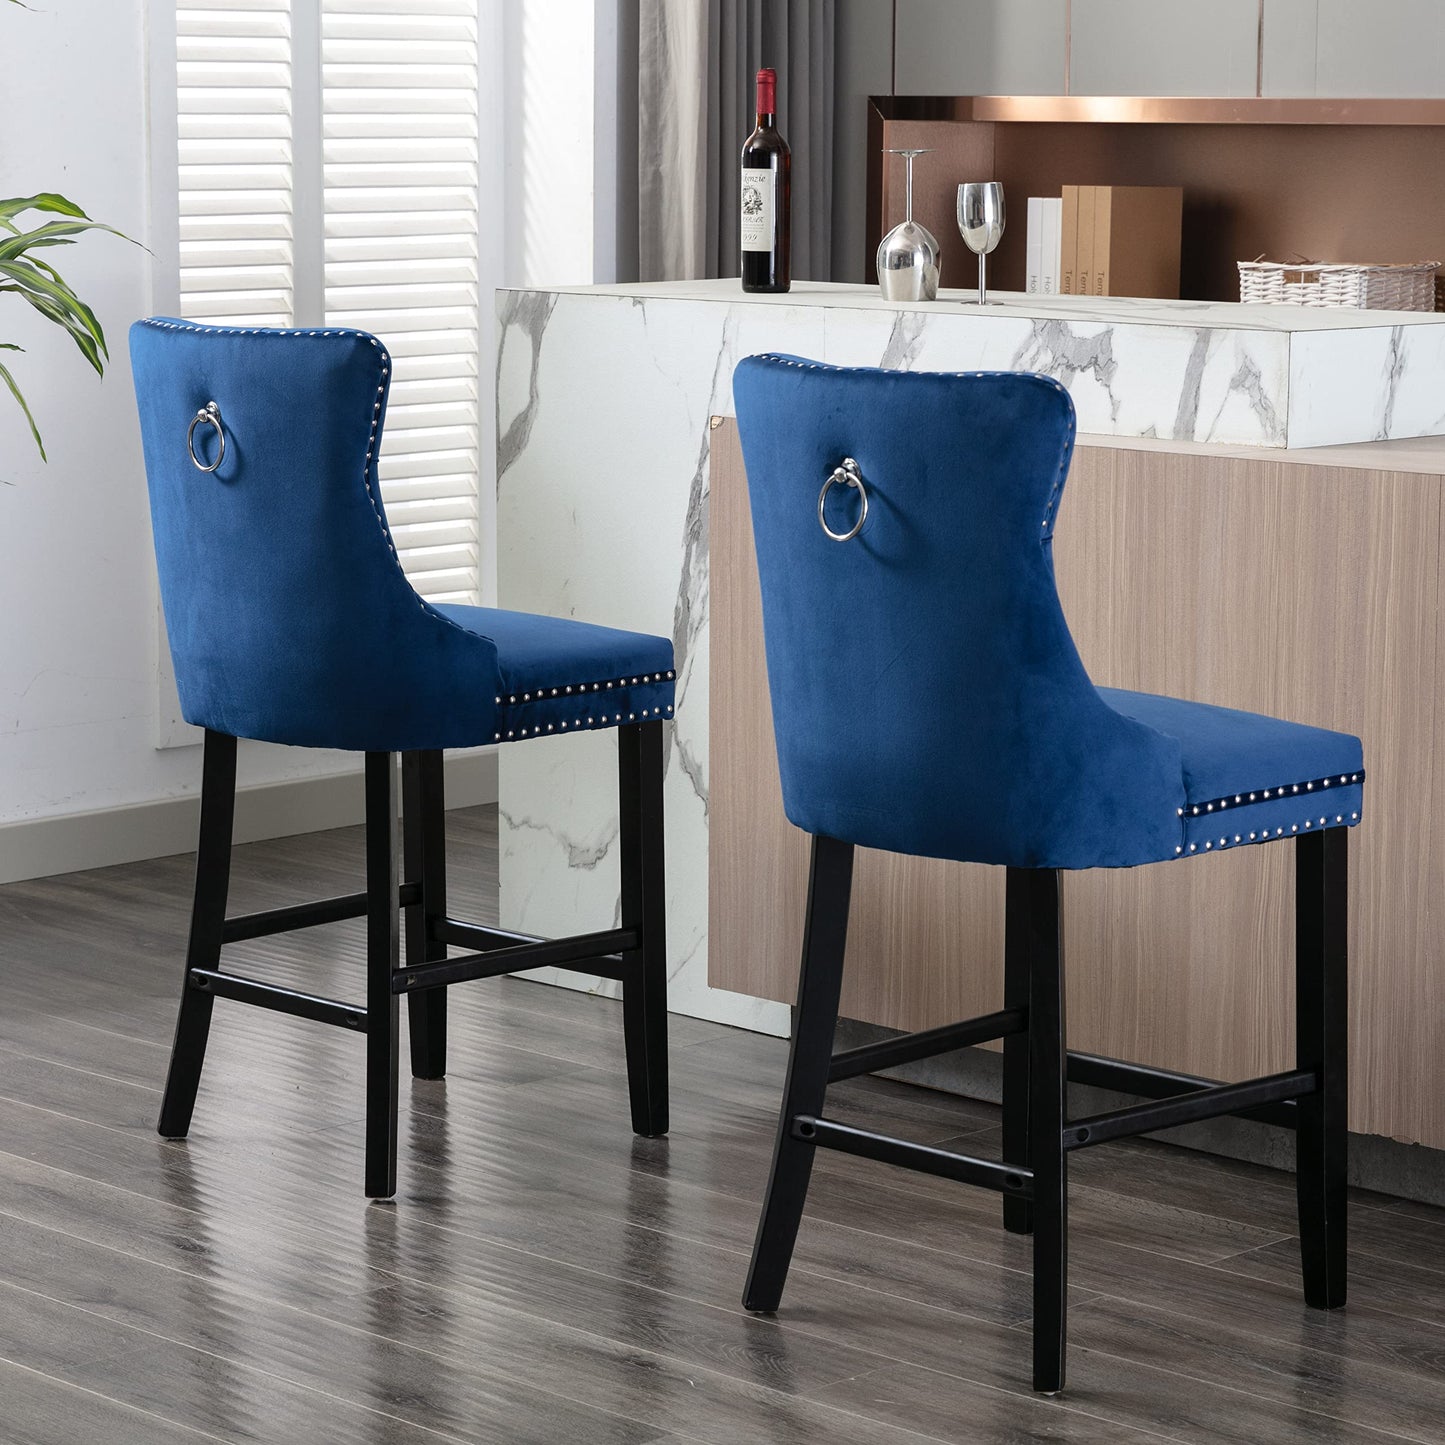 2X Velvet Bar Stools with Studs Trim Wooden Legs Tufted Dining Chairs Kitchen - image22